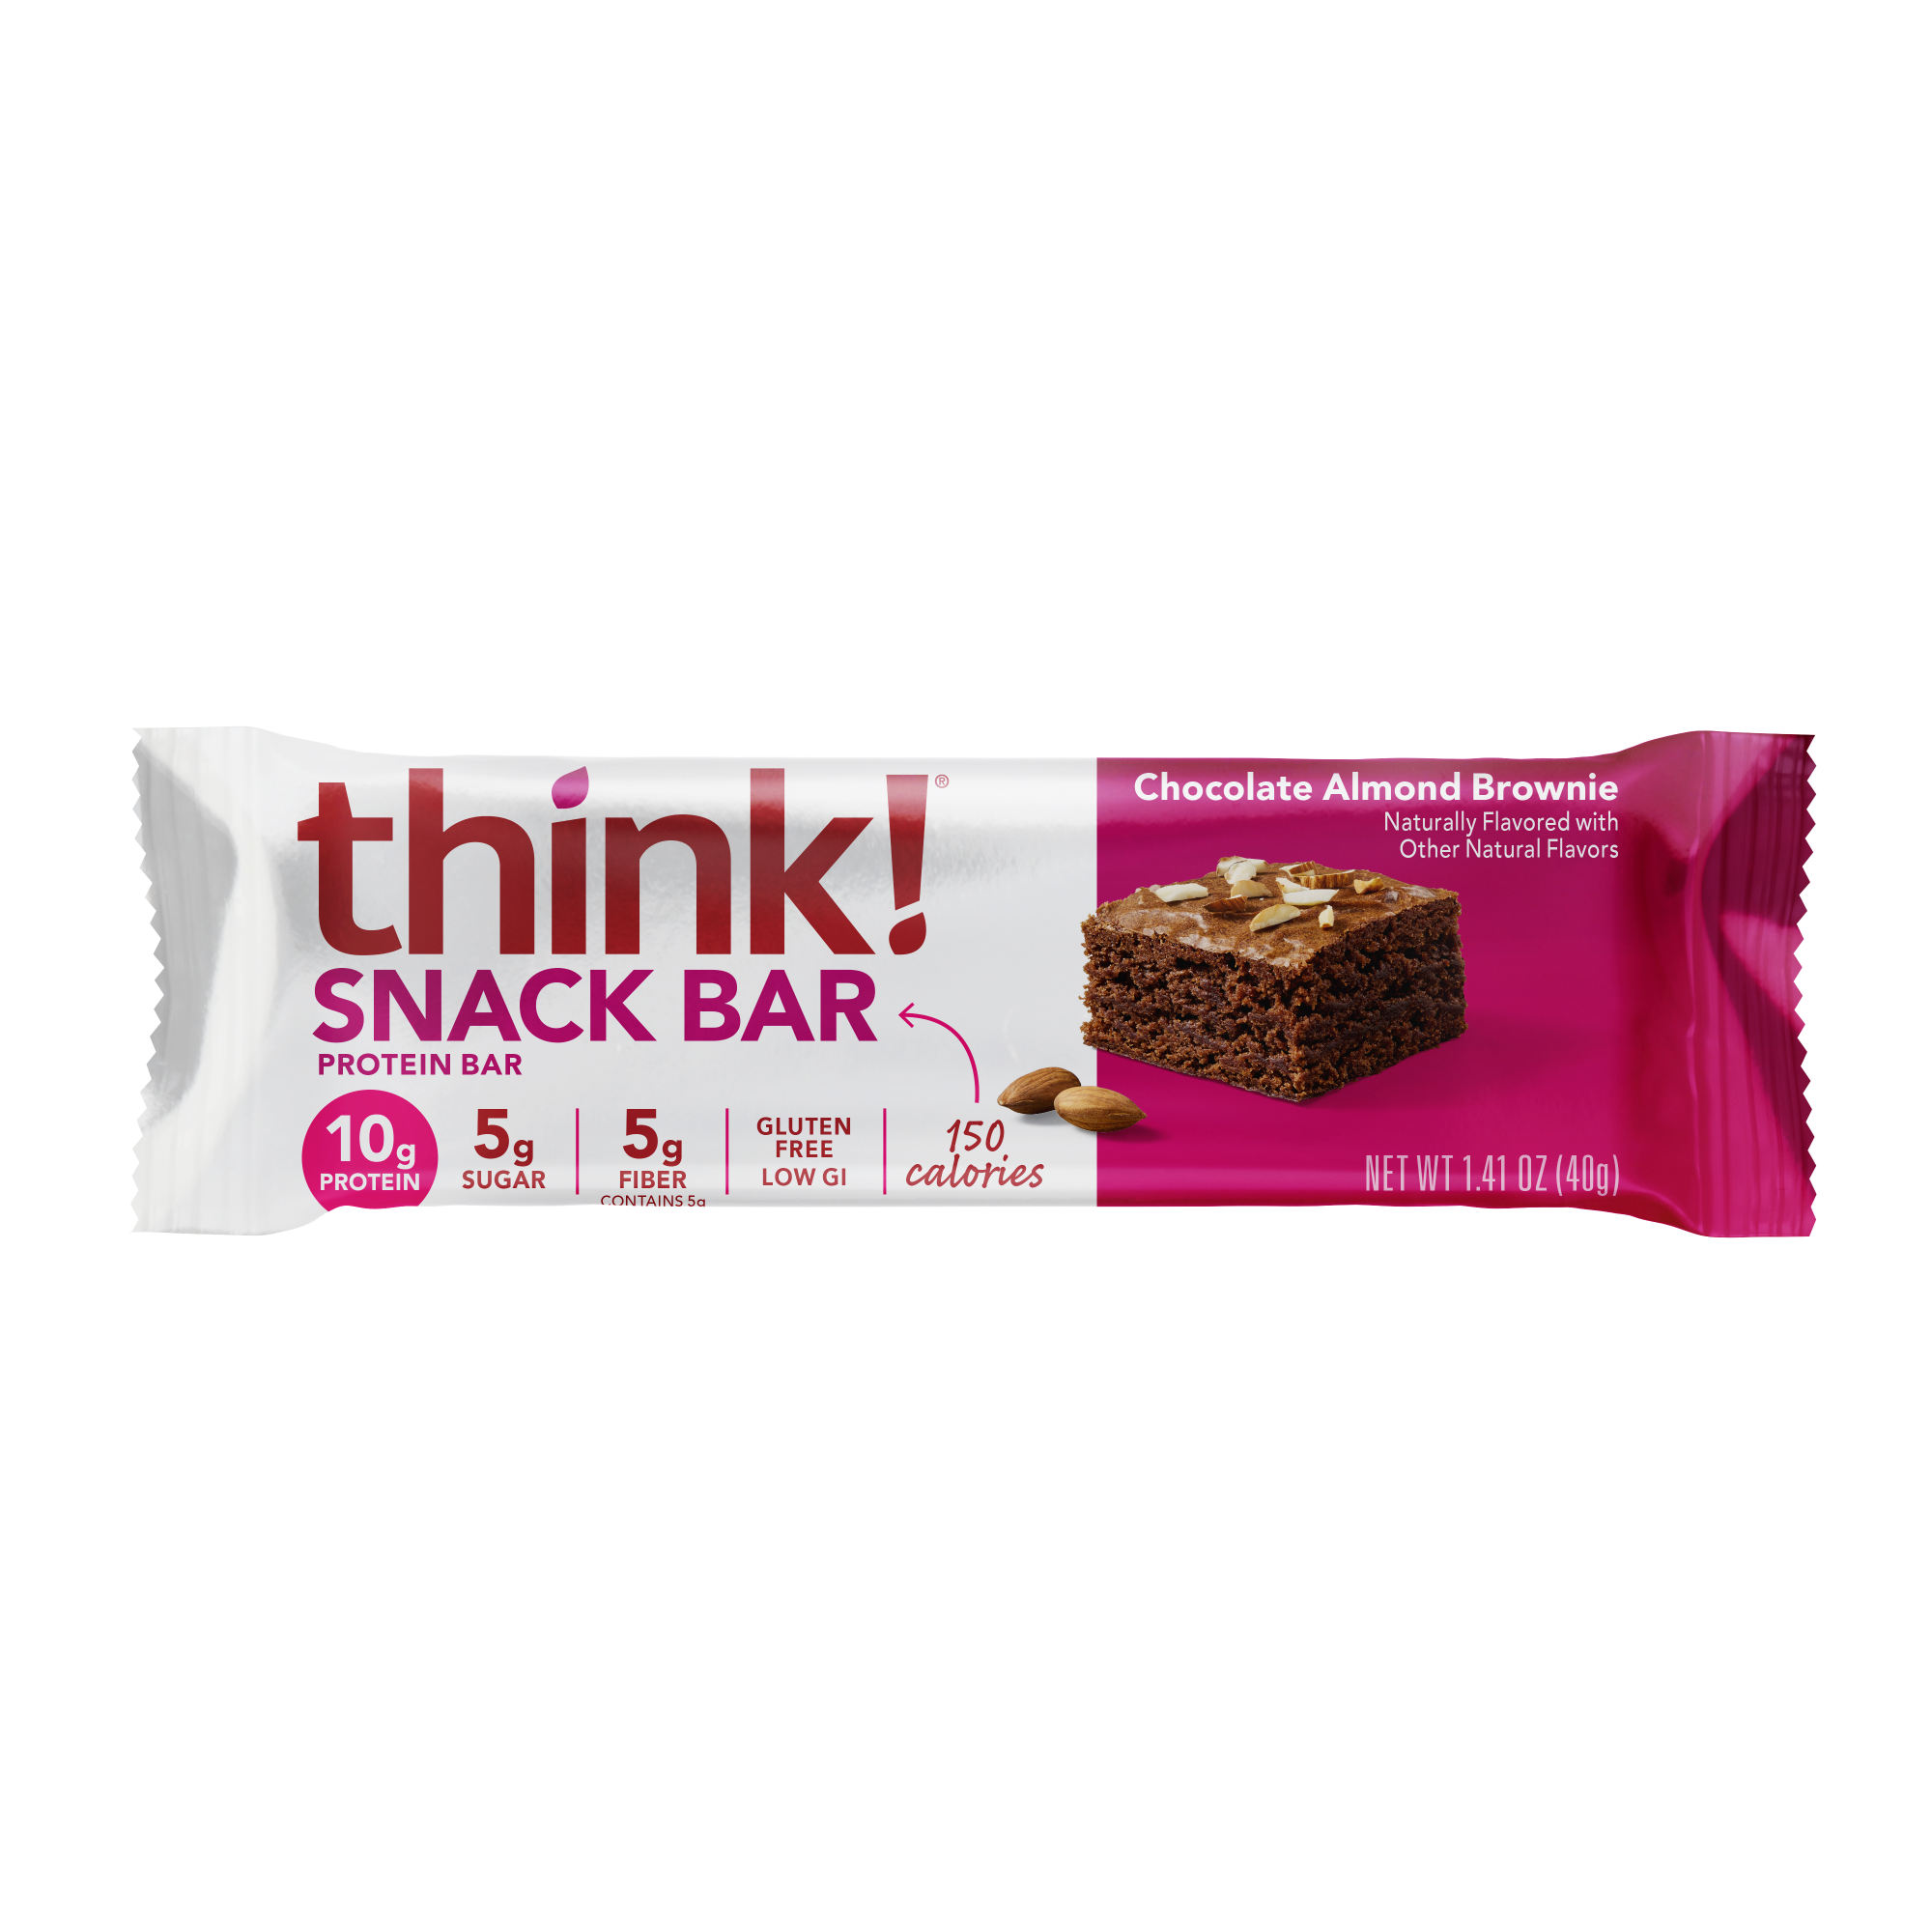 Healthy snack brand Nakd launches Protein Bars and Big Bars